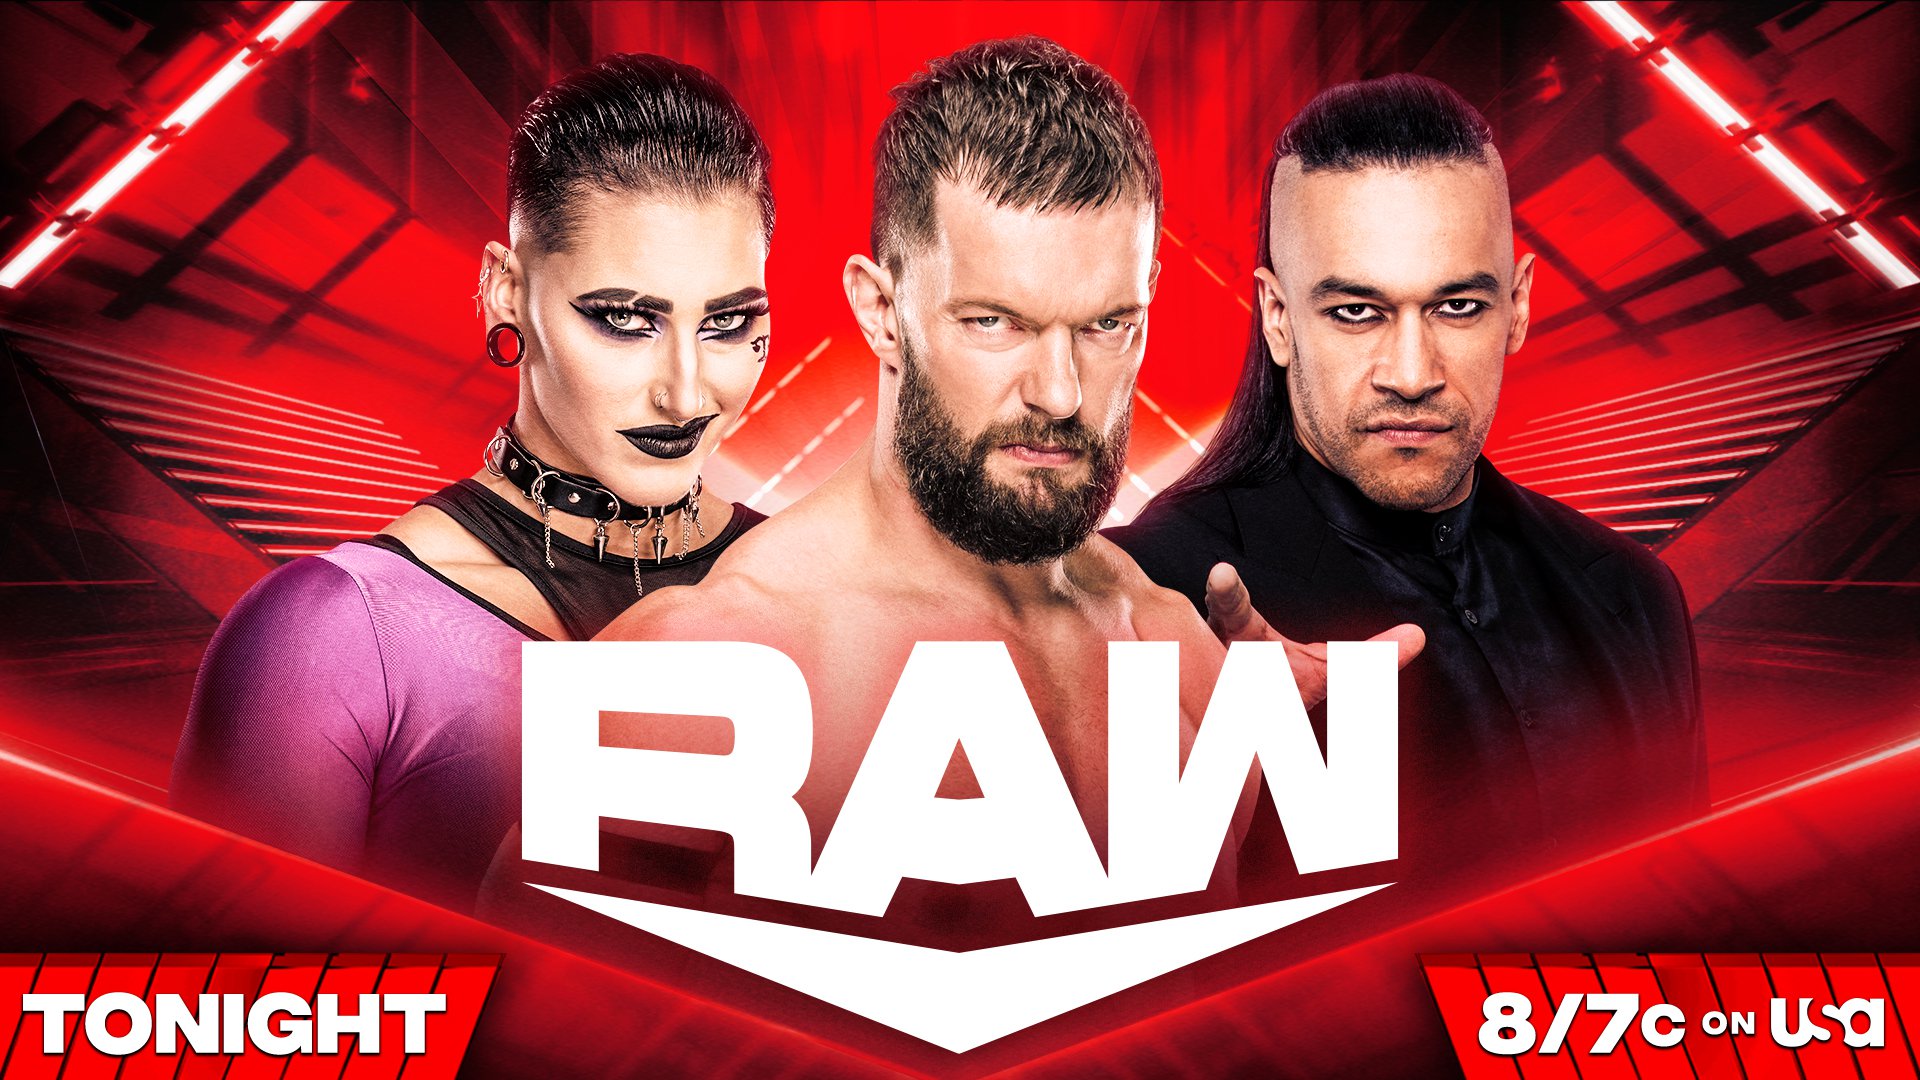 The Judgment Day return to Raw with a new direction WWE